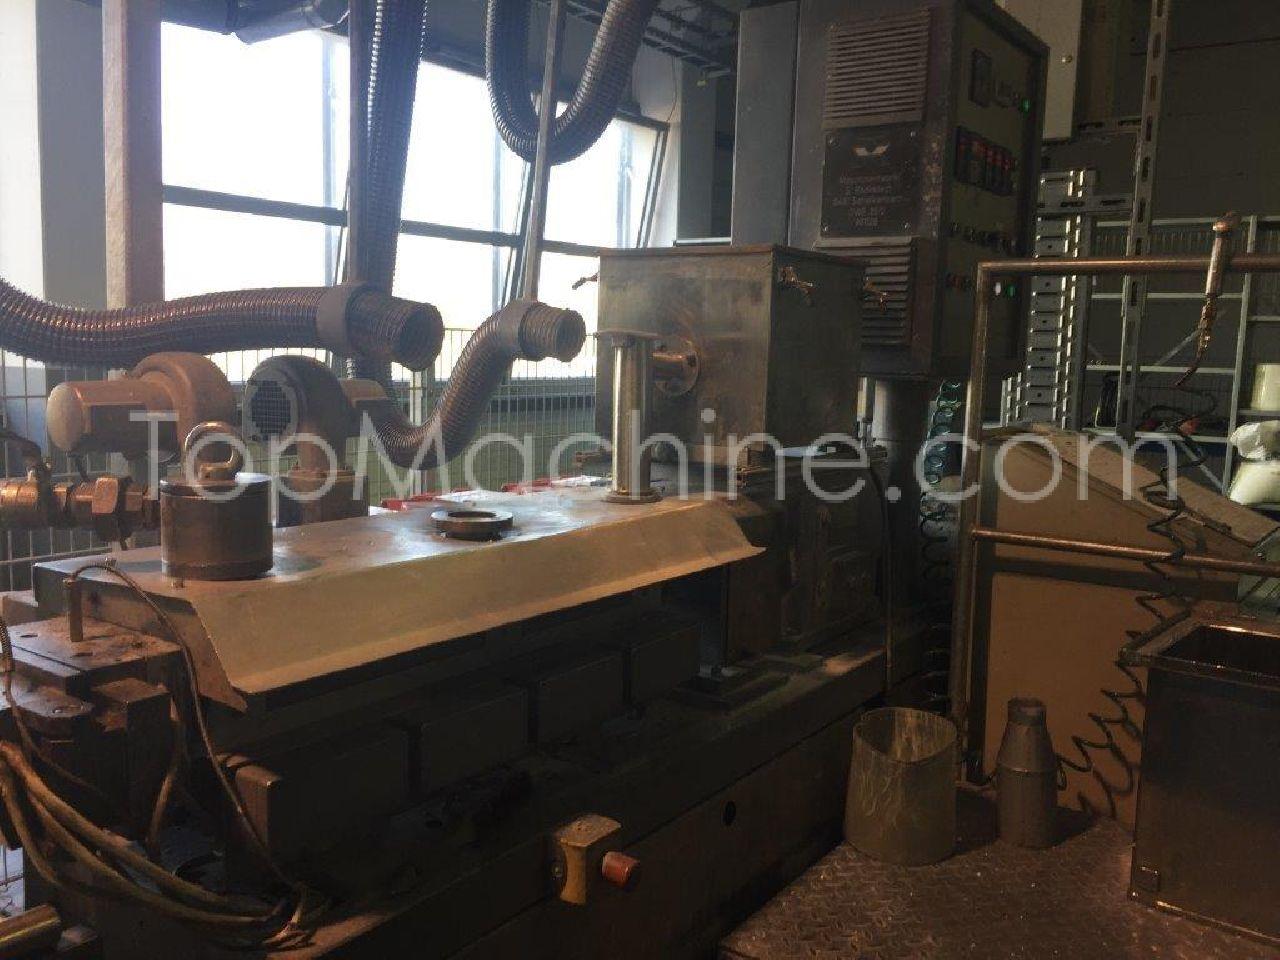 Used Rockstedt 55 2 Compounding Impianto di compounding